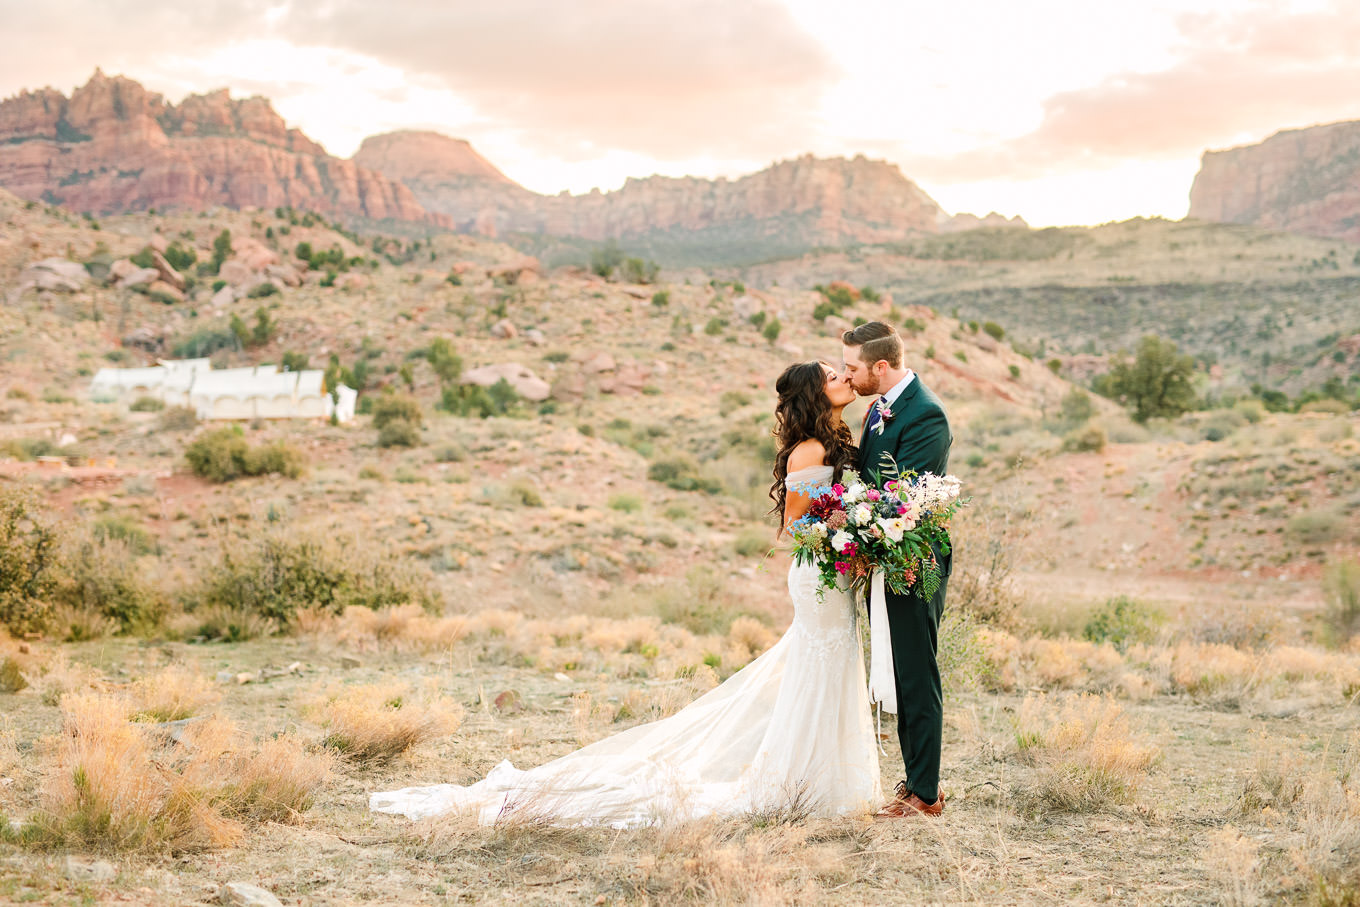 Bride and groom camping first look | Zion Under Canvas Elopement at Sunrise | Colorful adventure elopement photography | #utahelopement #zionelopement #zionwedding #undercanvaszion #sunriseelopement  Source: Mary Costa Photography | Los Angeles